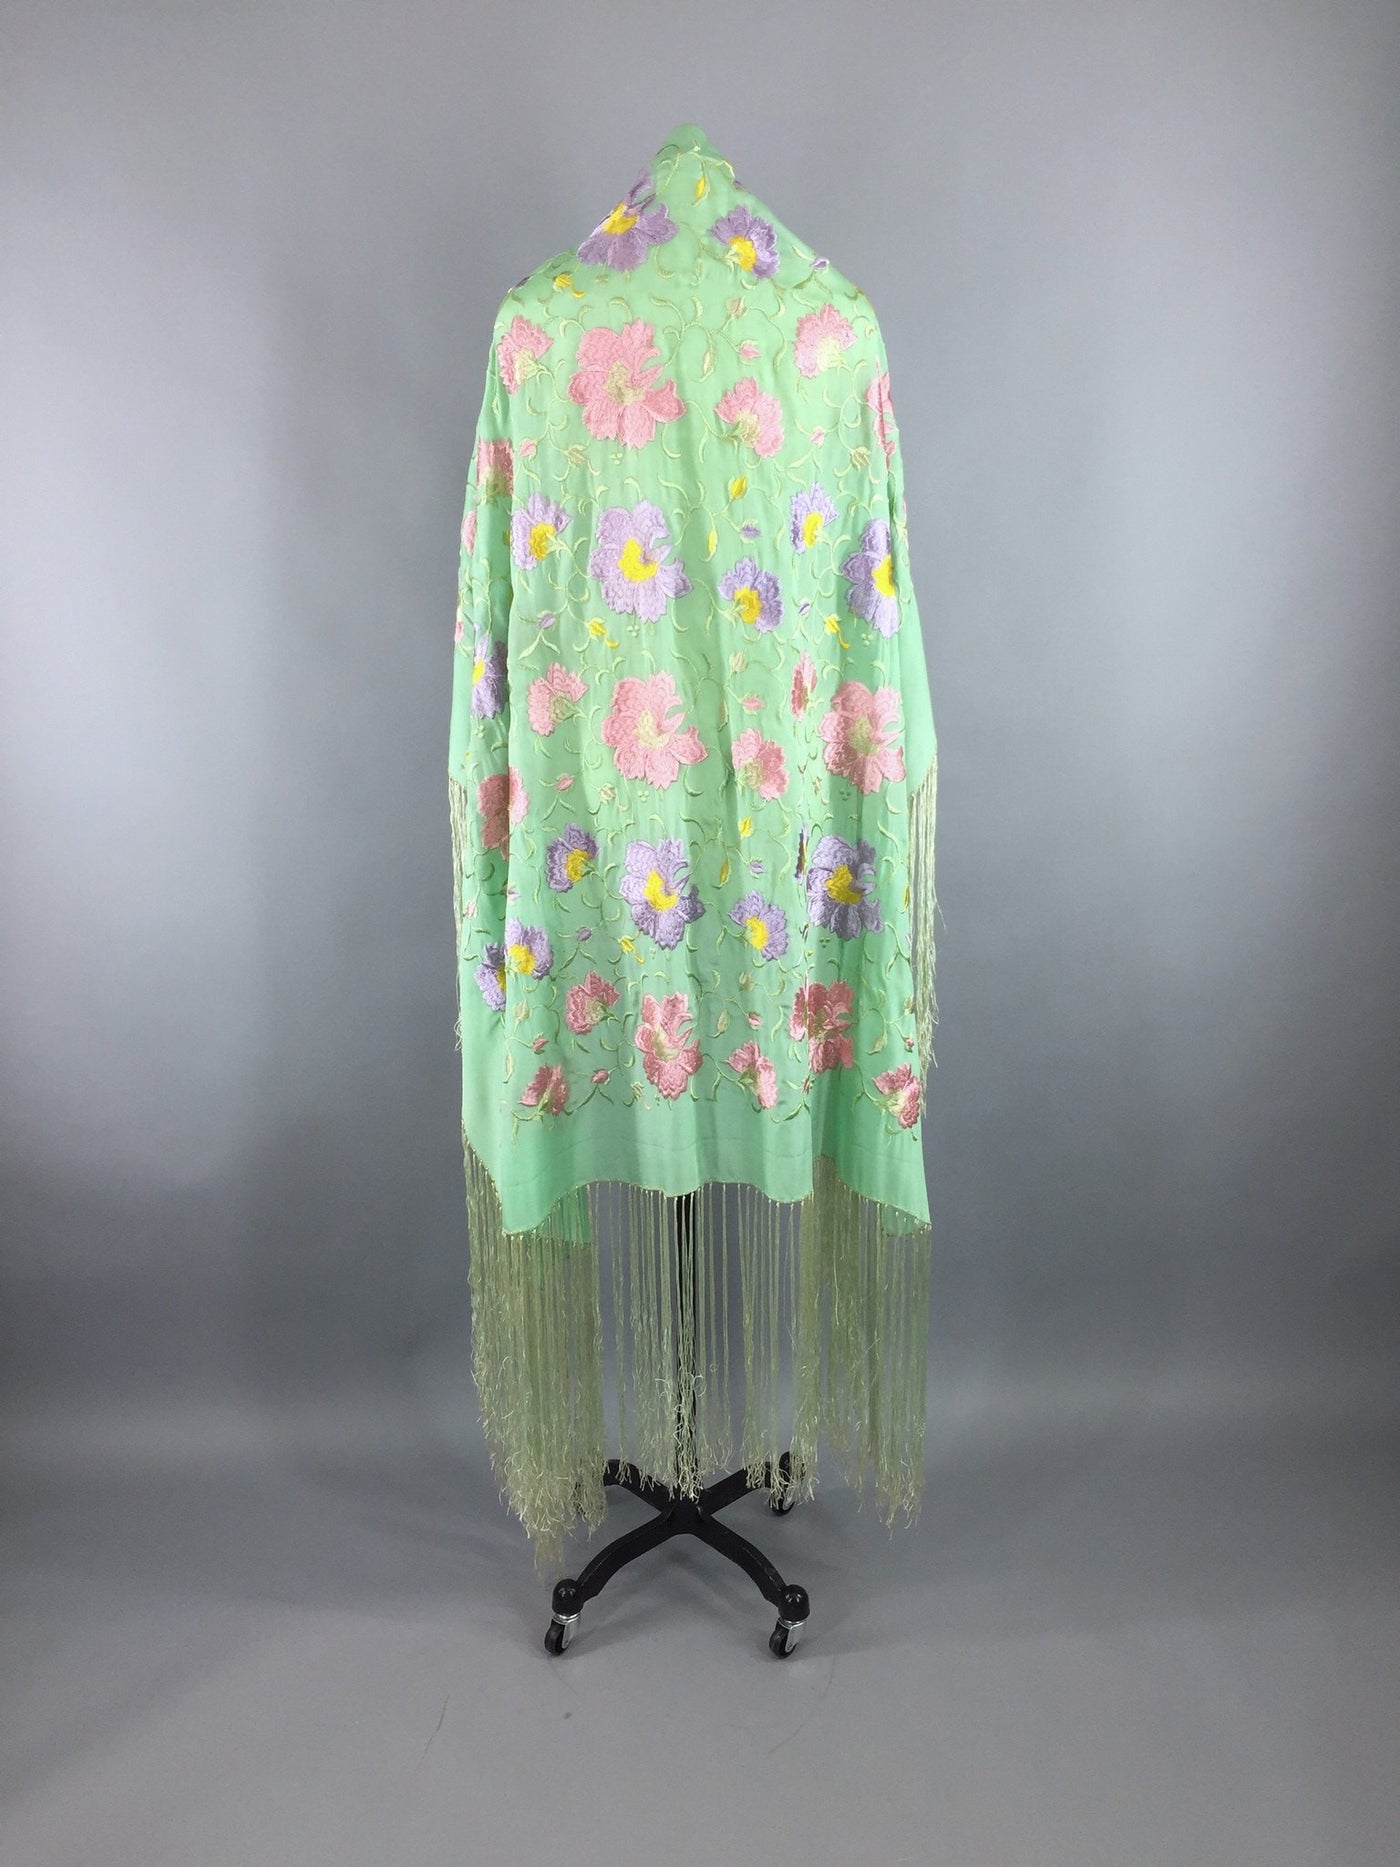 Vintage 1920s - 1930s Embroidered Silk Fringed Piano Shawl Wrap ...